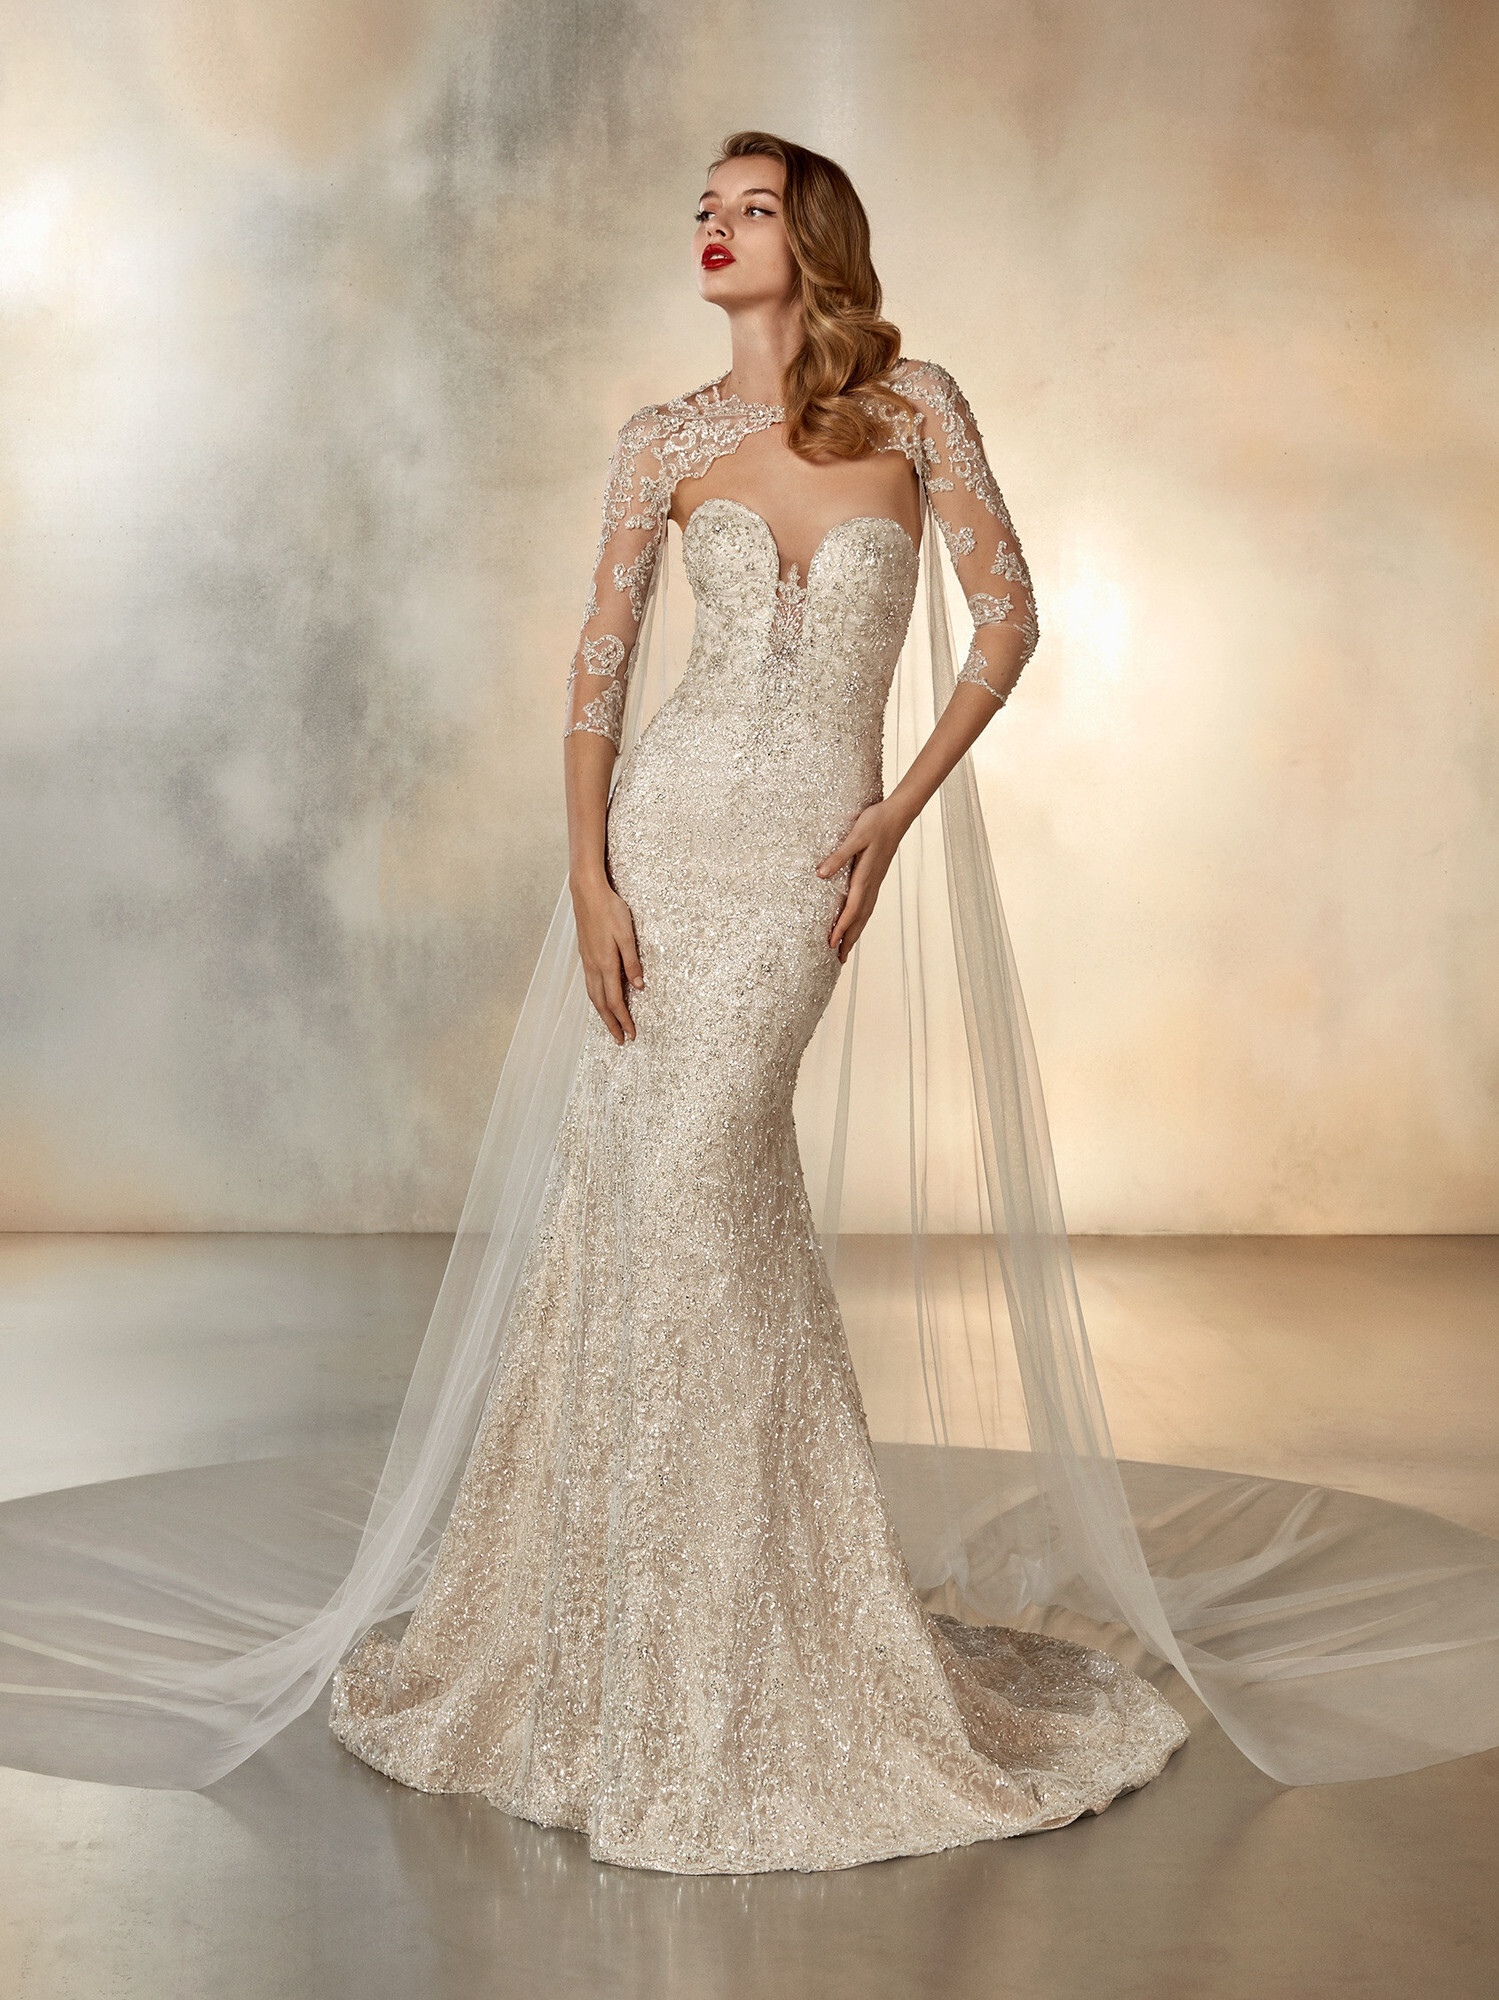 MOON KING Wedding Dress from Atelier Pronovias - hitched.co.uk